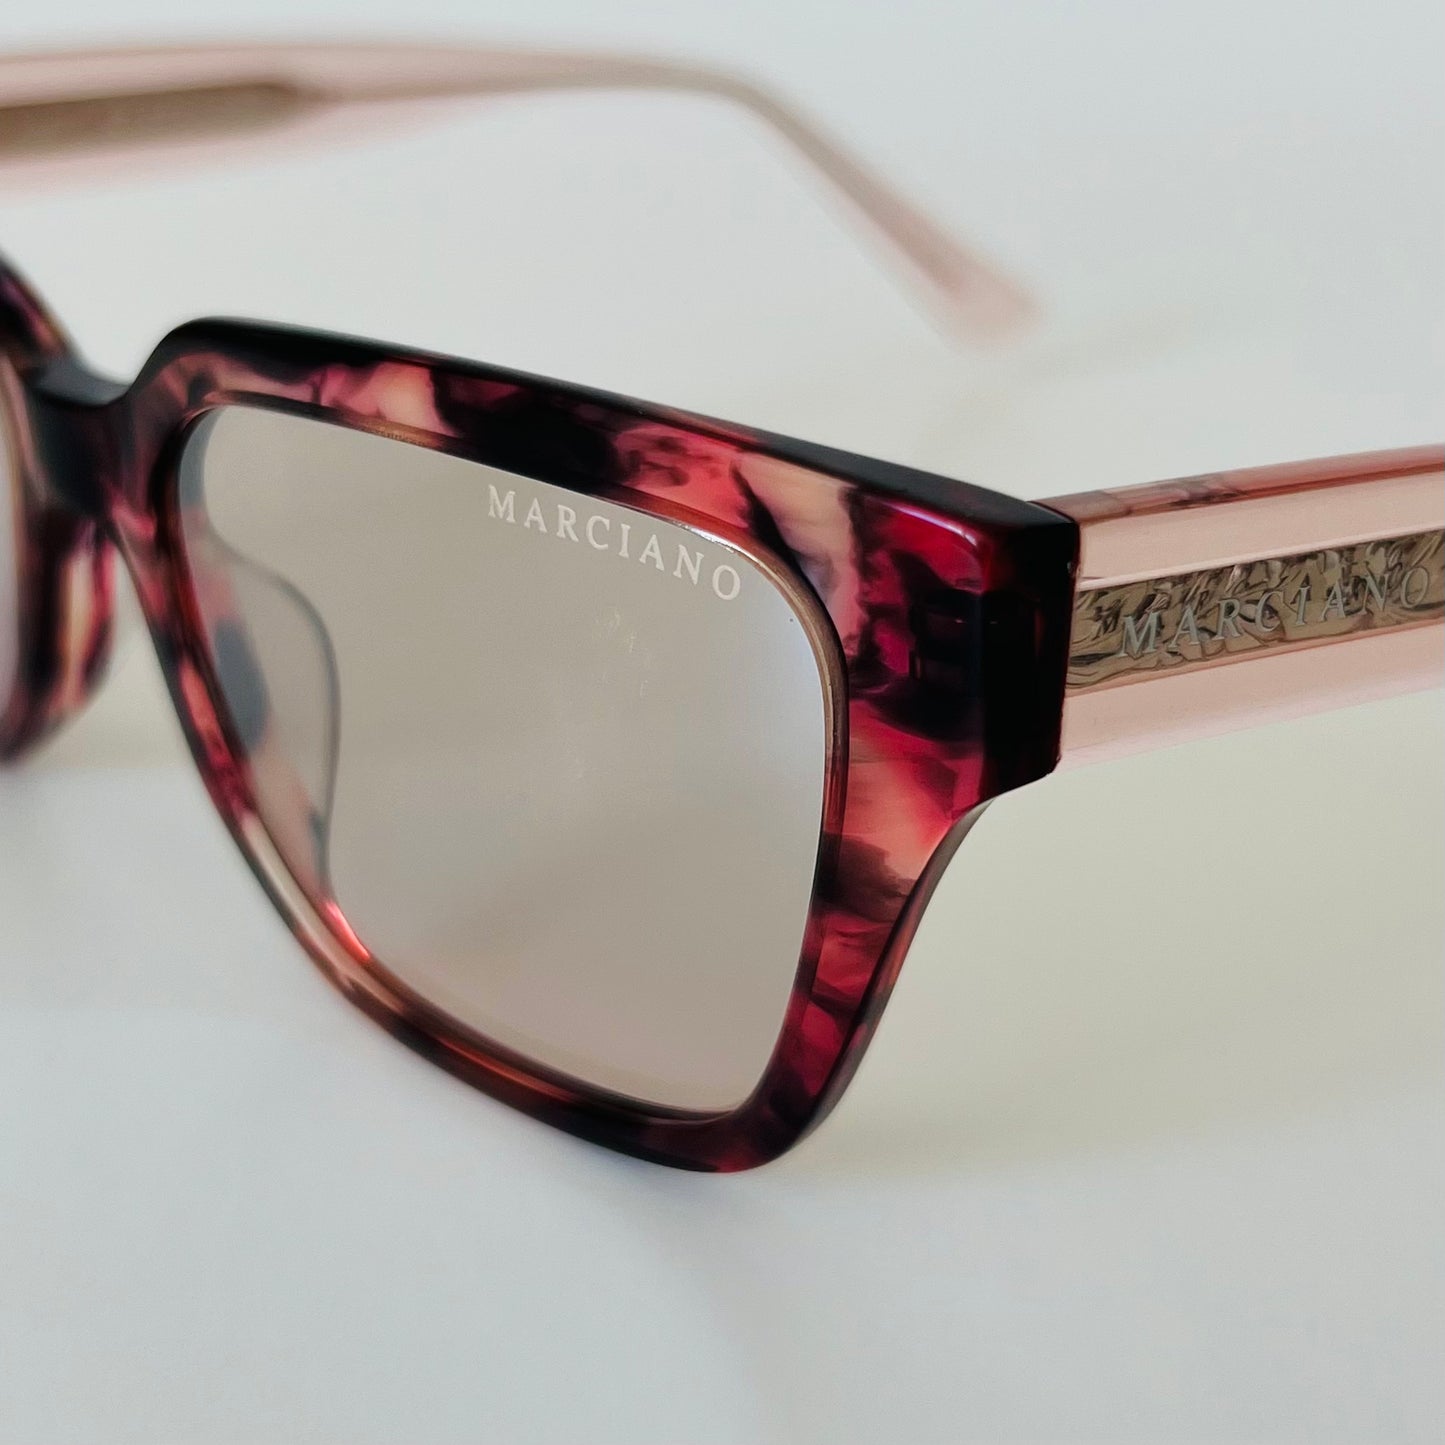 GUESS by Marciano Sunglasses GM0799